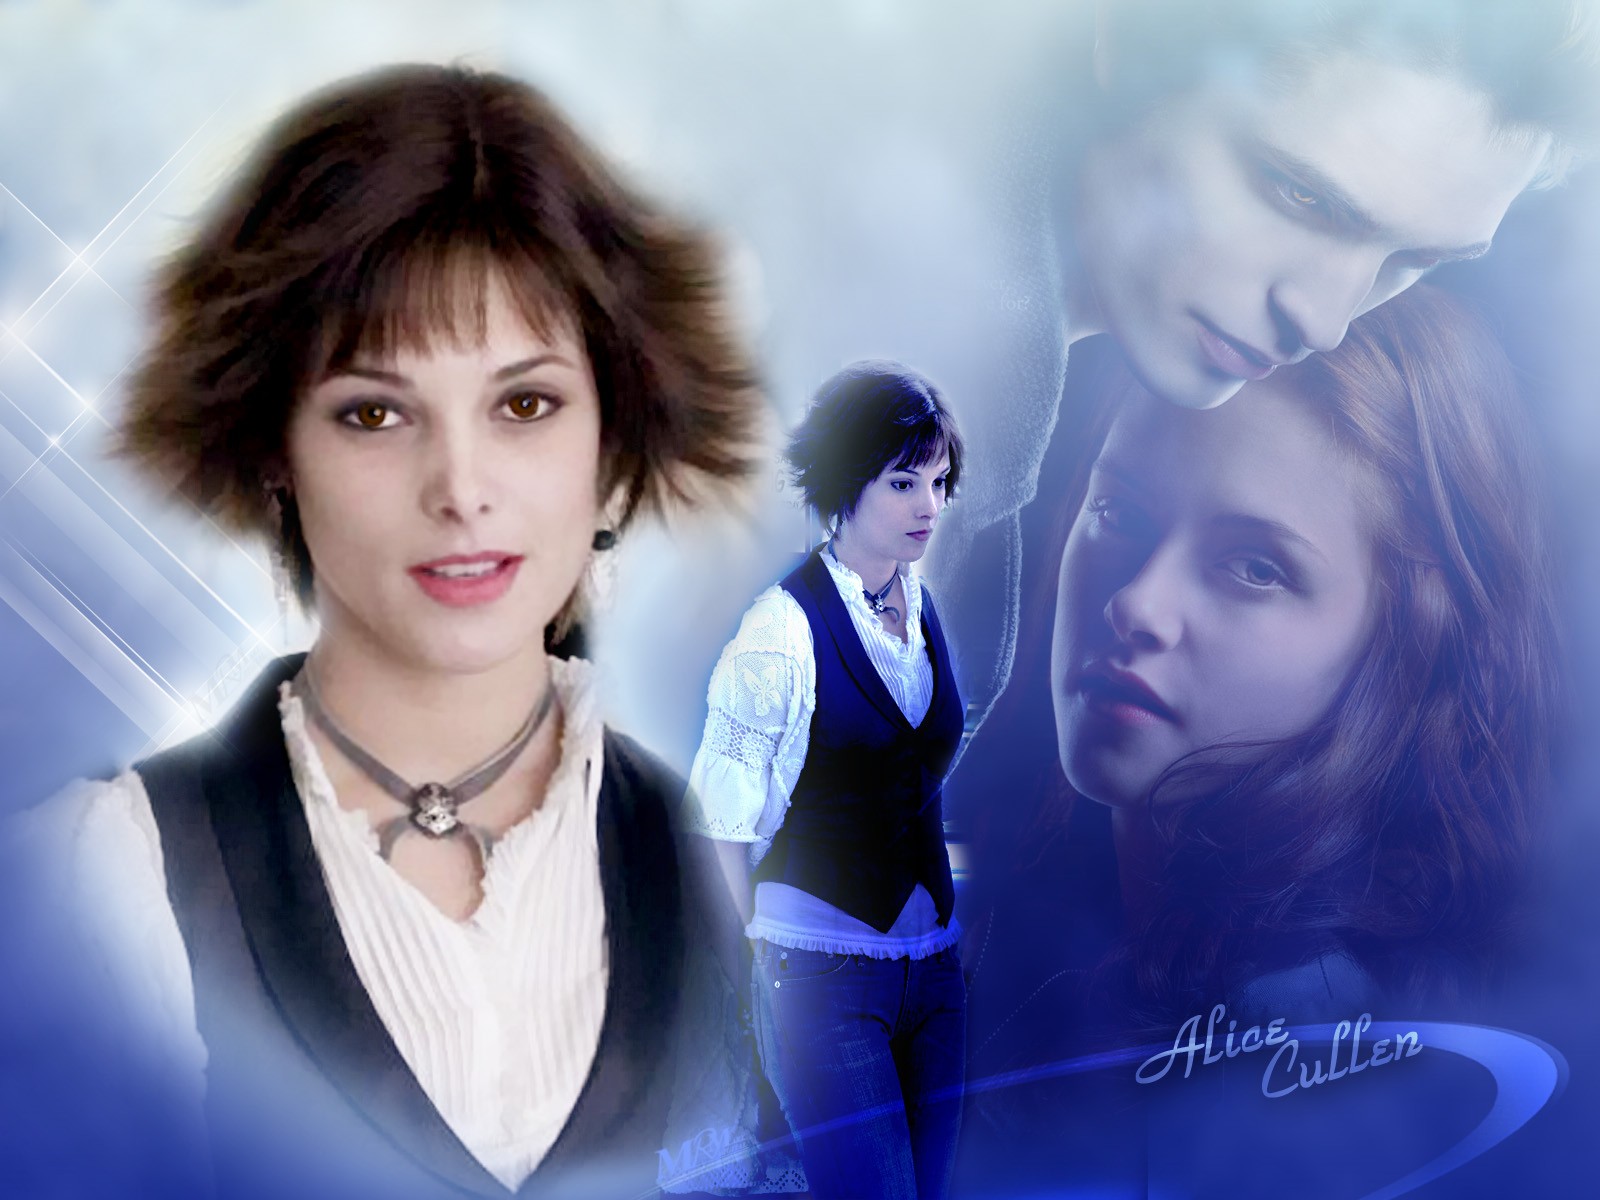 Wallpapers HD Alice Cullen Crepsculo 1600x1200. 